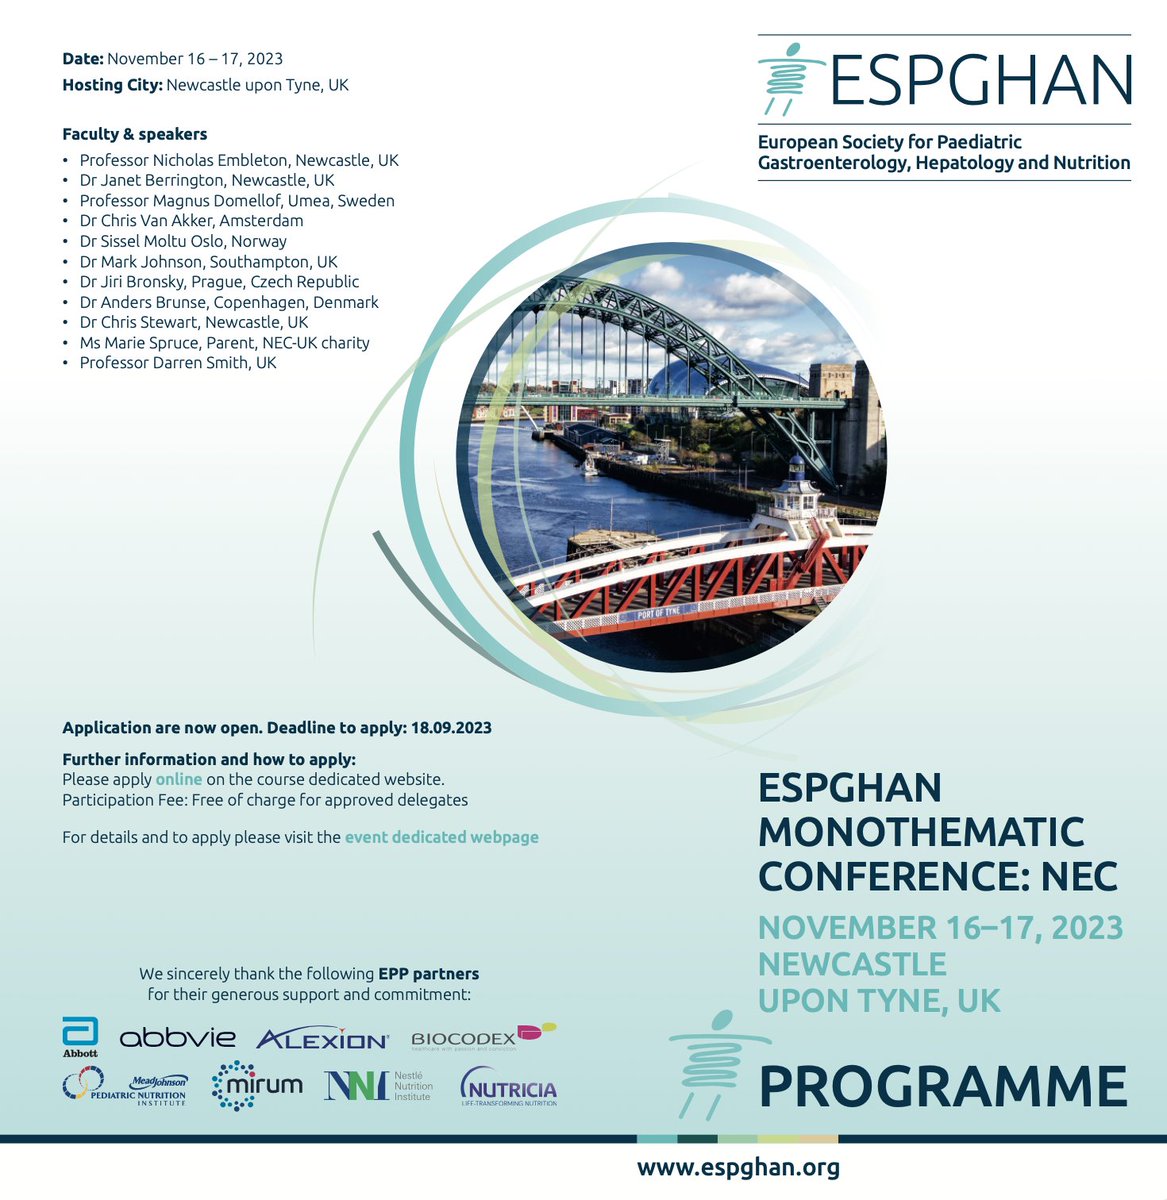 Come and join us in Newcastle to learn all about necrotising enterocolitis including recent trials, cutting-edge research, and clinical management. Lots of networking opportunities! November 16-17. More information and application available here espghan.org/knowledge-cent…